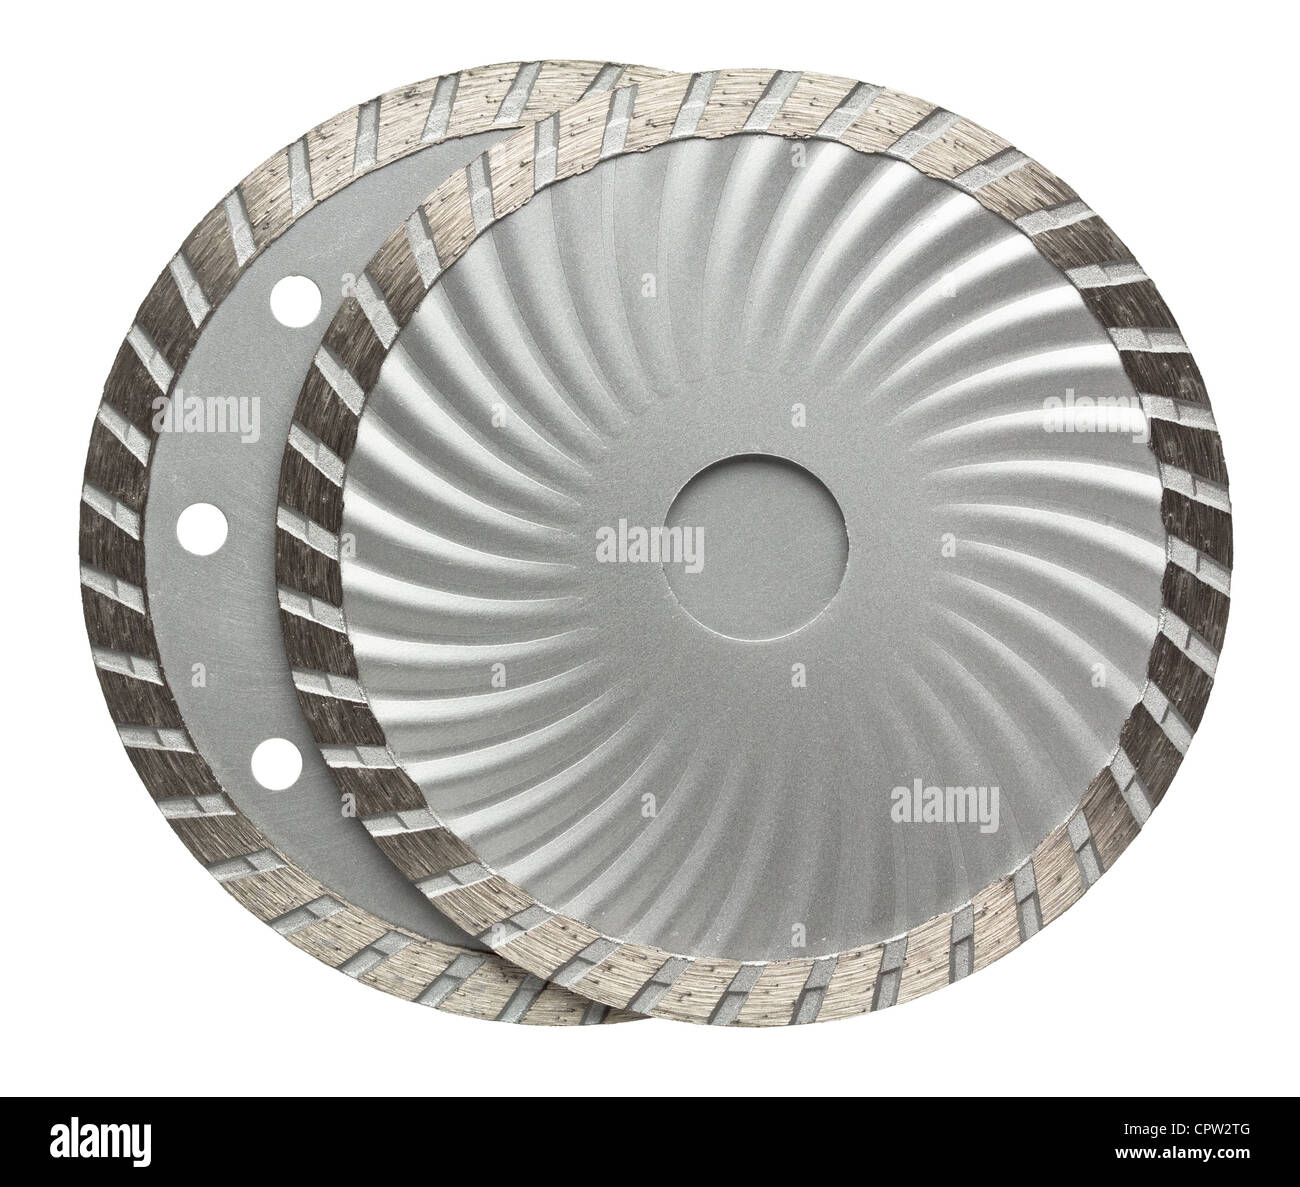 Circular saw blades. Disks for stone cutting work. Stock Photo